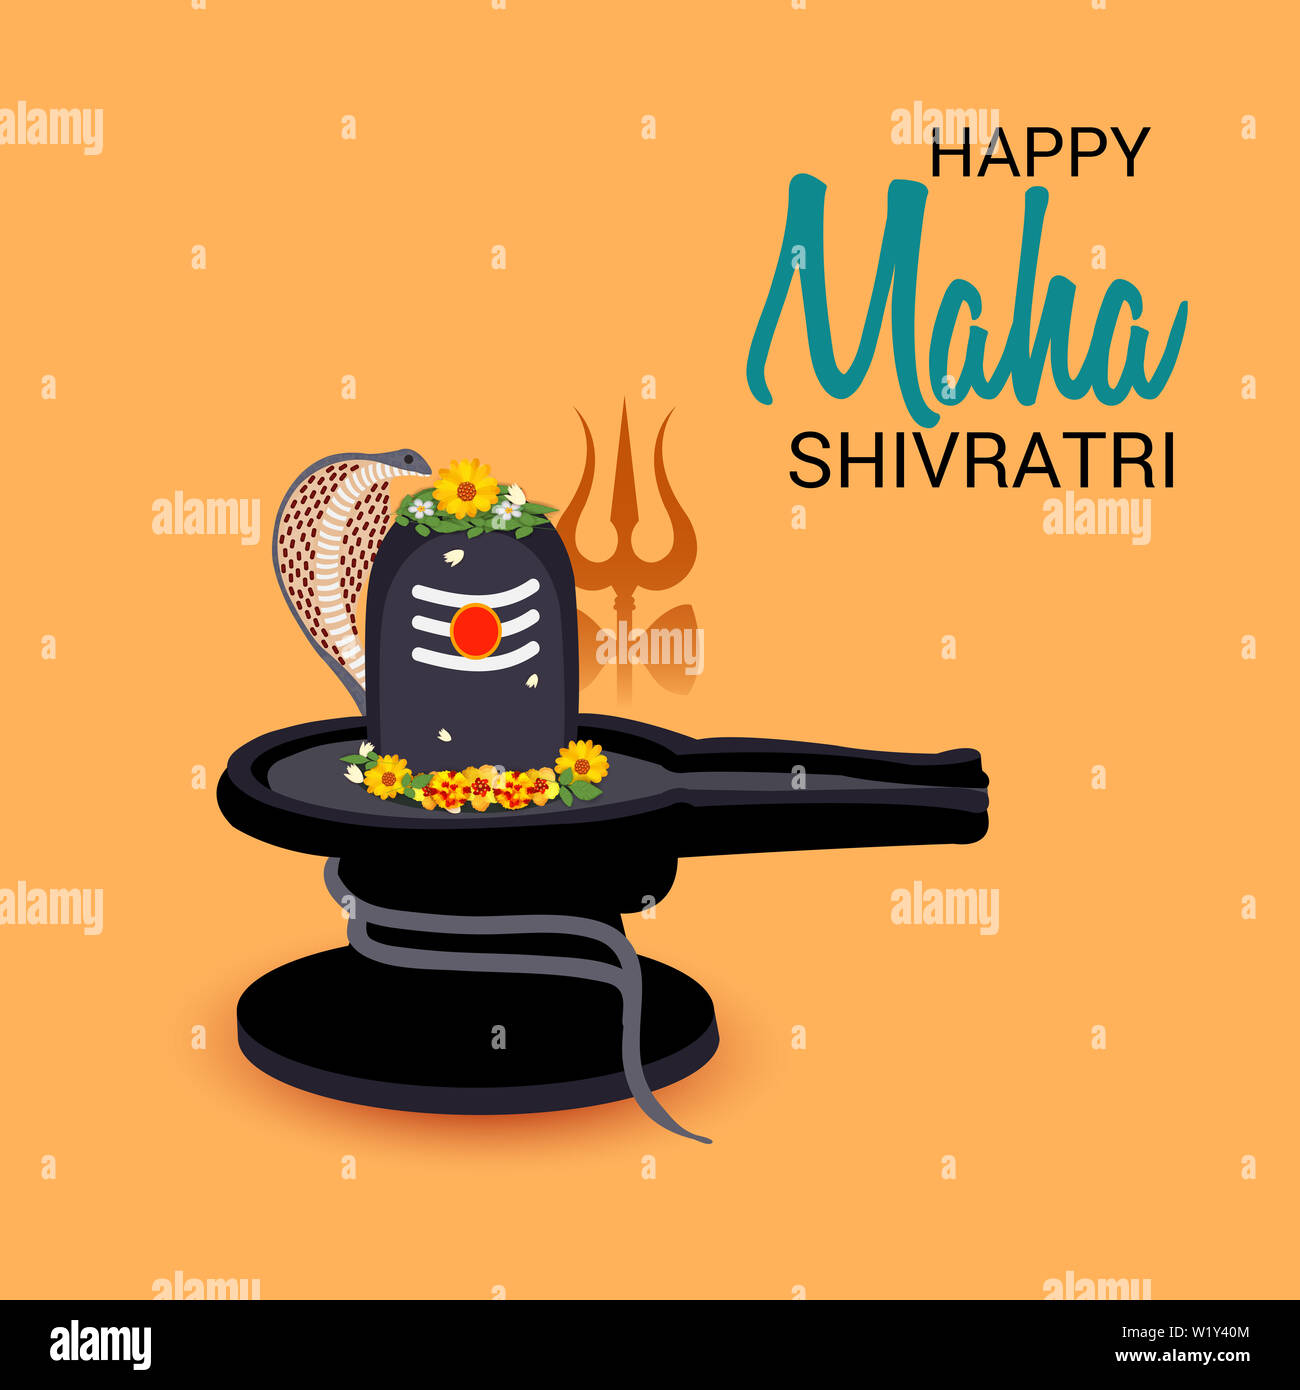 Vector Illustration Of a Background for Happy Maha Shivratri Greeting Card  Design Stock Photo - Alamy